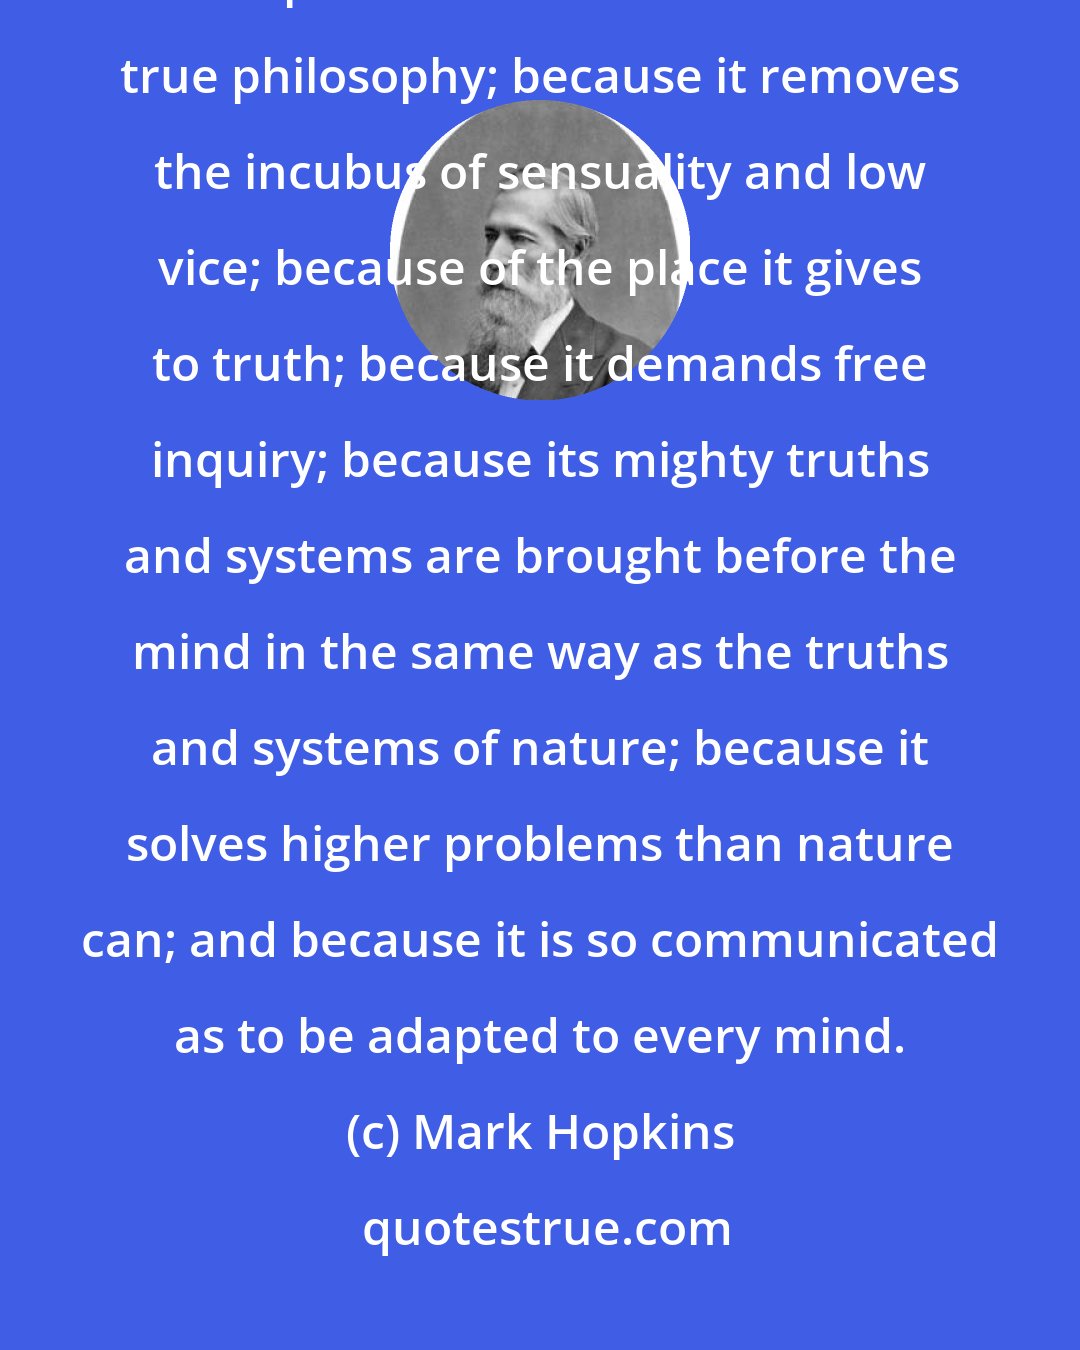 Mark Hopkins: We say then, that Christianity is adapted to the intellect, because its spirit coincides with that of true philosophy; because it removes the incubus of sensuality and low vice; because of the place it gives to truth; because it demands free inquiry; because its mighty truths and systems are brought before the mind in the same way as the truths and systems of nature; because it solves higher problems than nature can; and because it is so communicated as to be adapted to every mind.